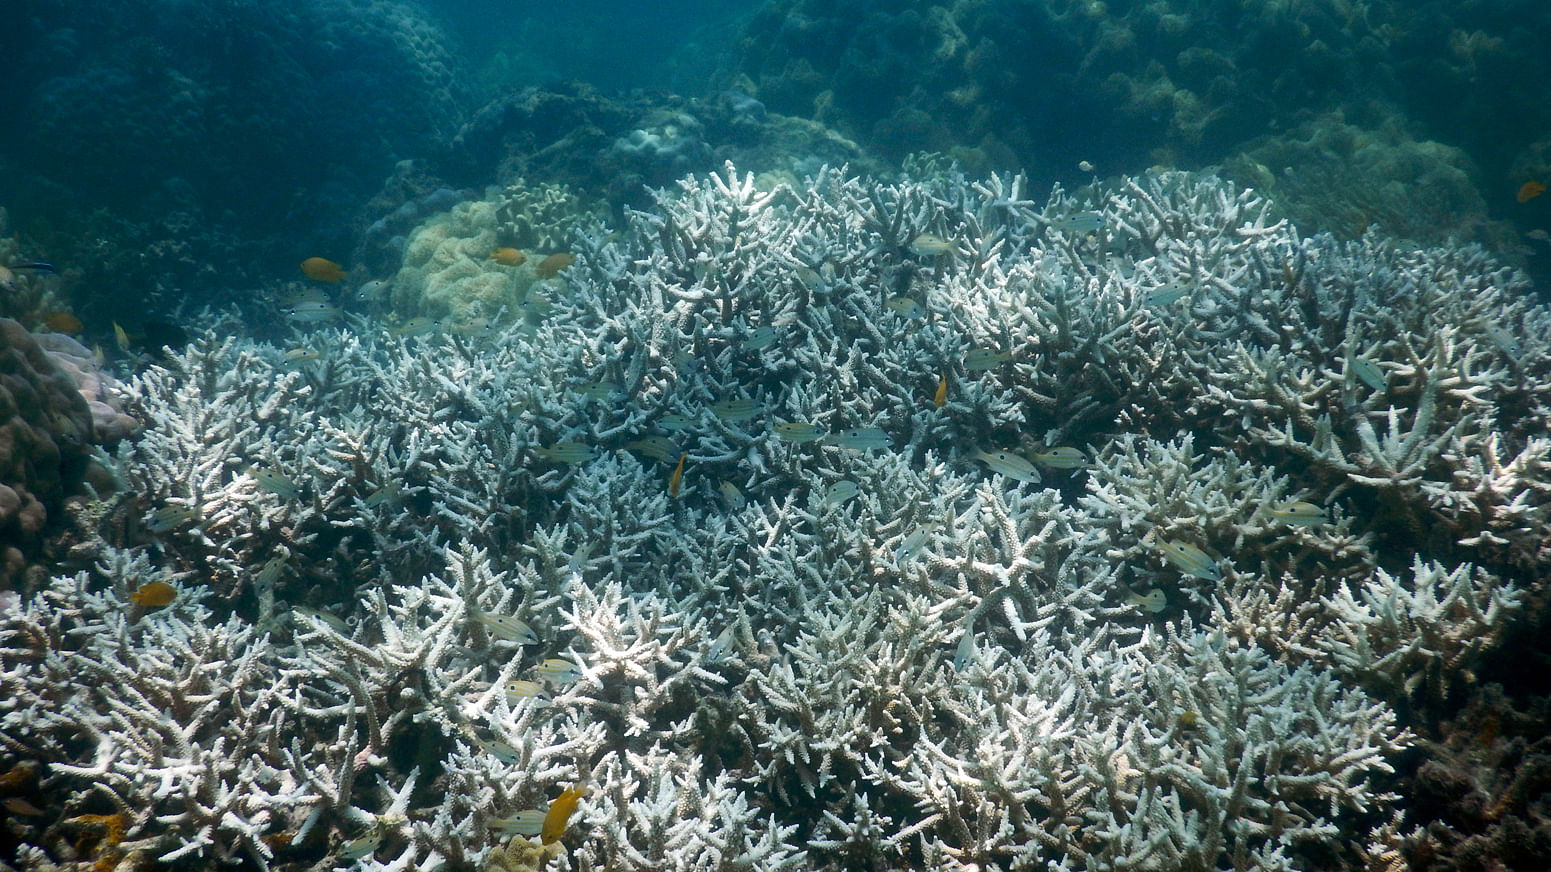 A photo released by the ARC Centre of Excellence for Coral Reef Studies shows mature stag-horn coral bleached at Lizard Island, Great Barrier Reef off the eastern coast of northern Australia.